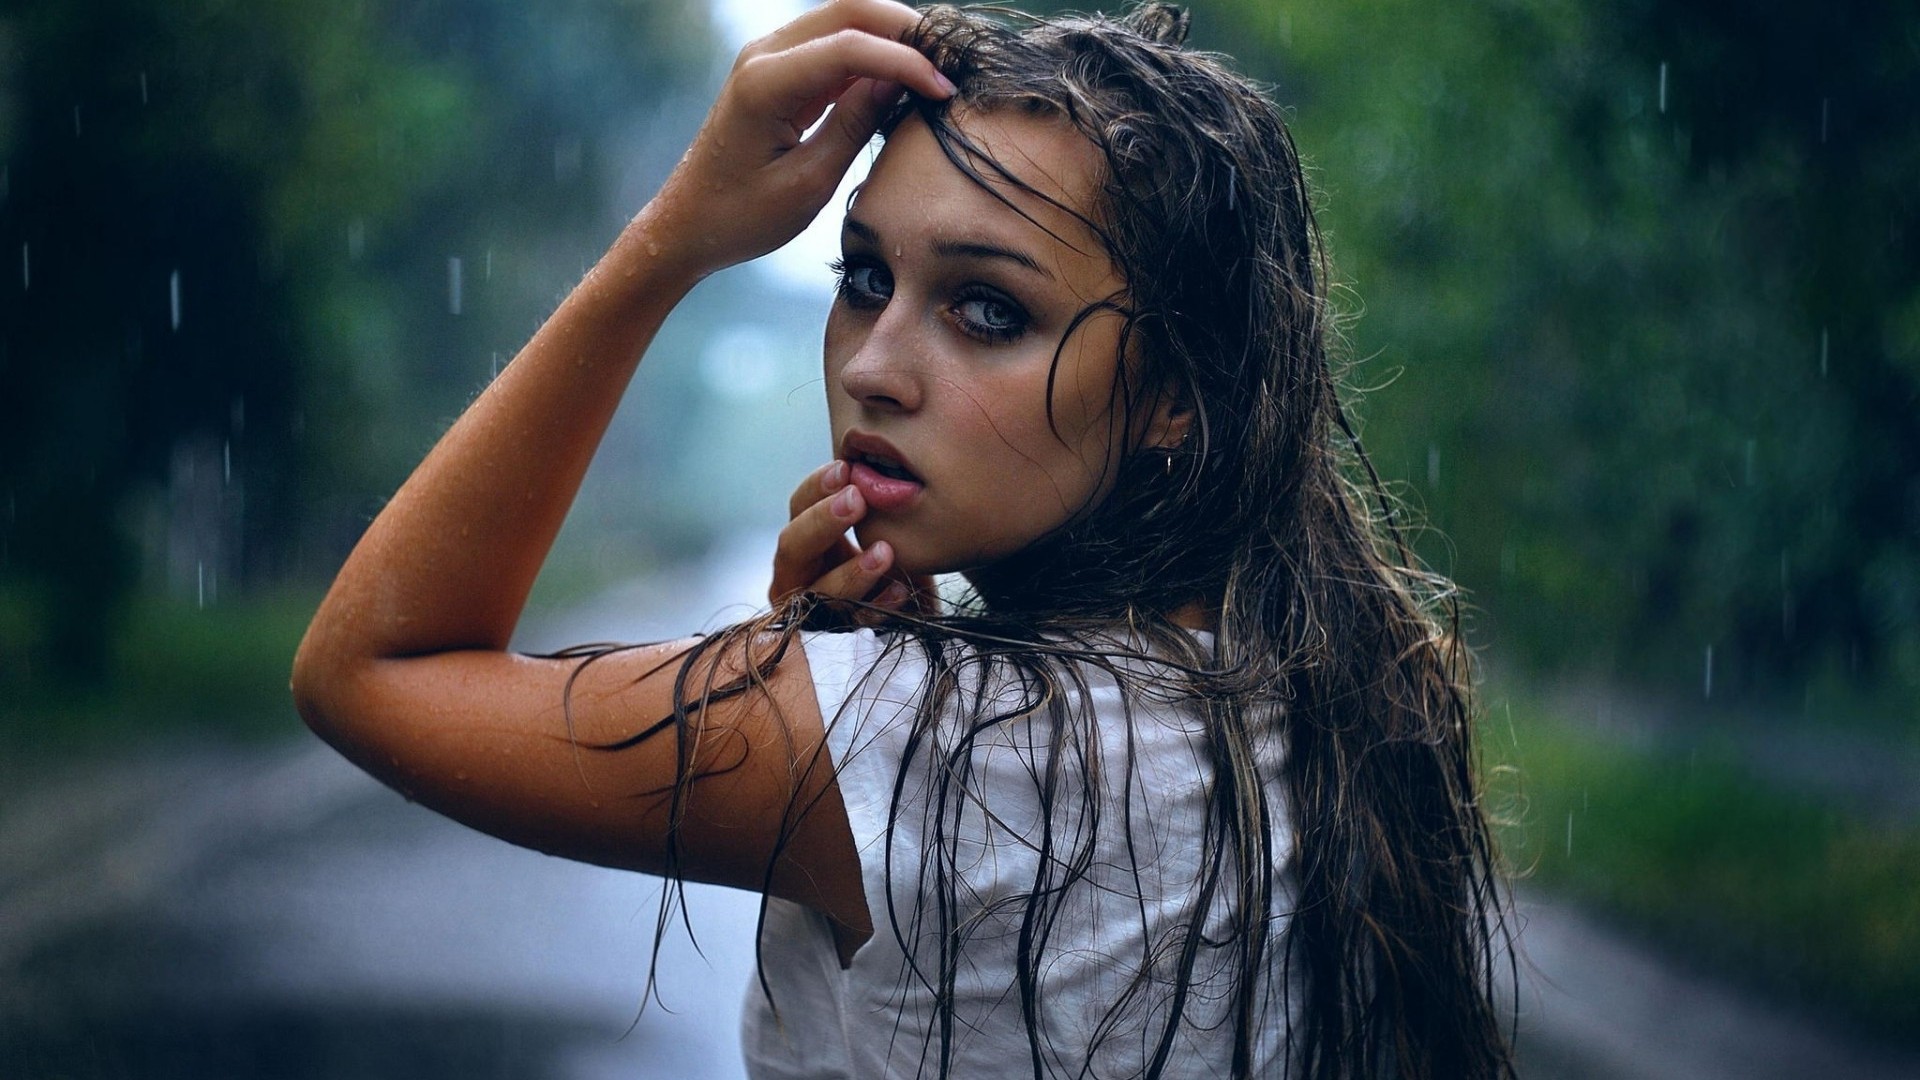 Brunette Girl Gets Wet In The Rain Wallpapers And Images Wallpapers Pictures Photos